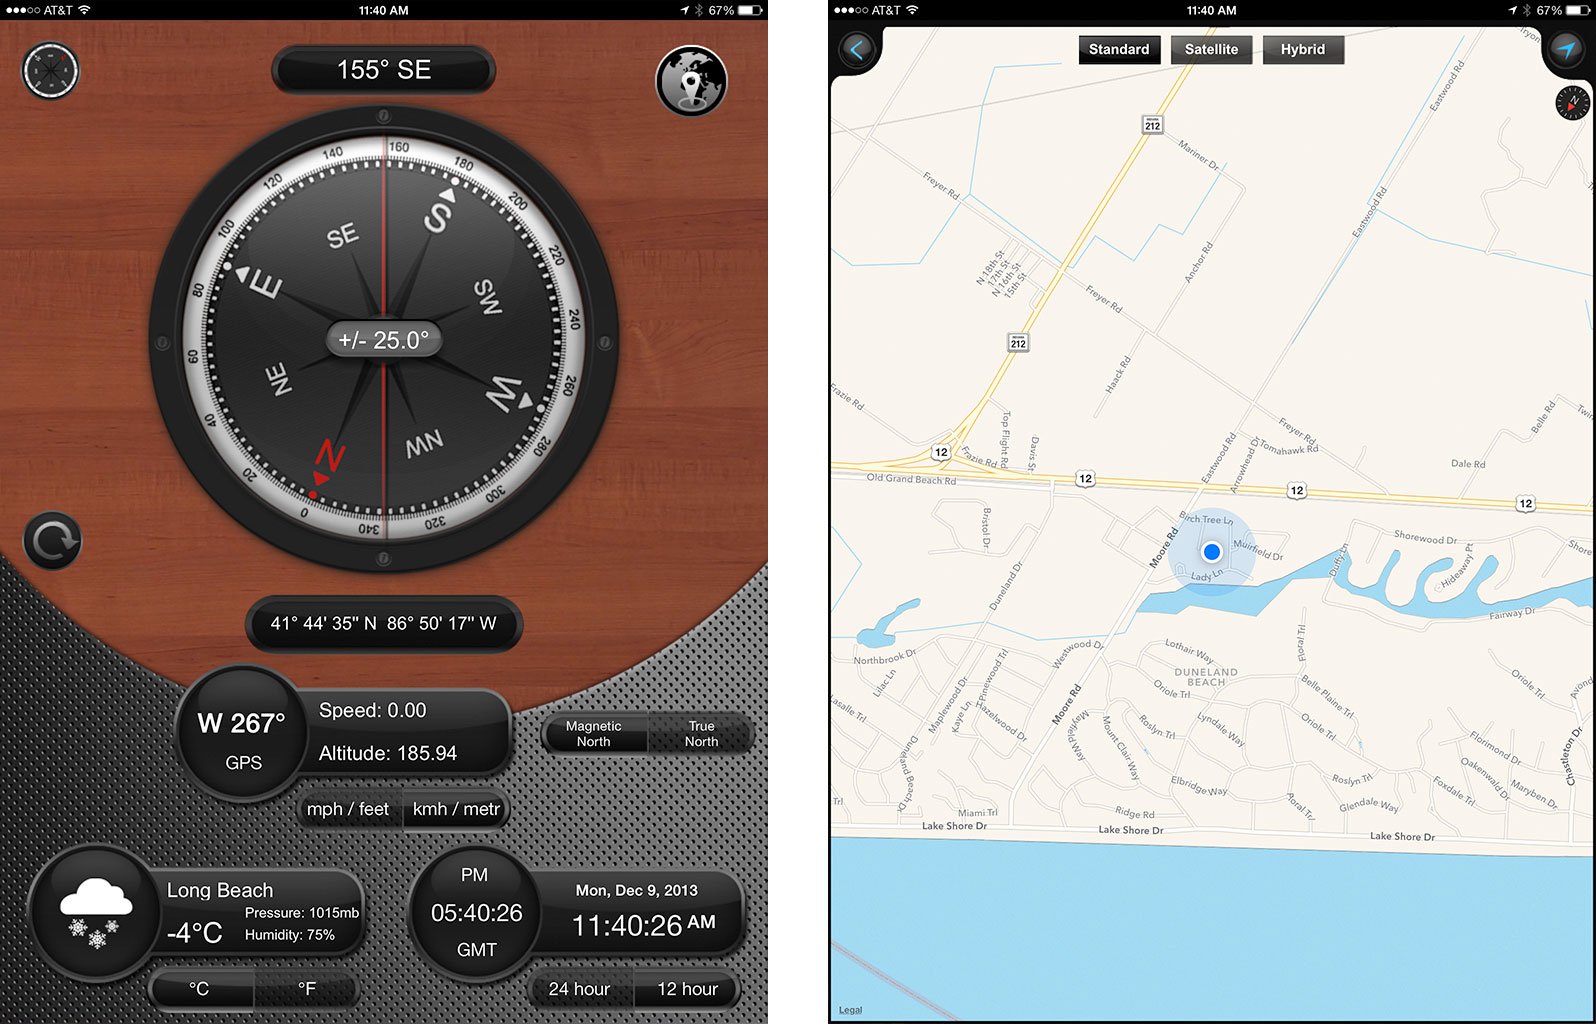 Best compass apps for iPad: Compass 54 Pro